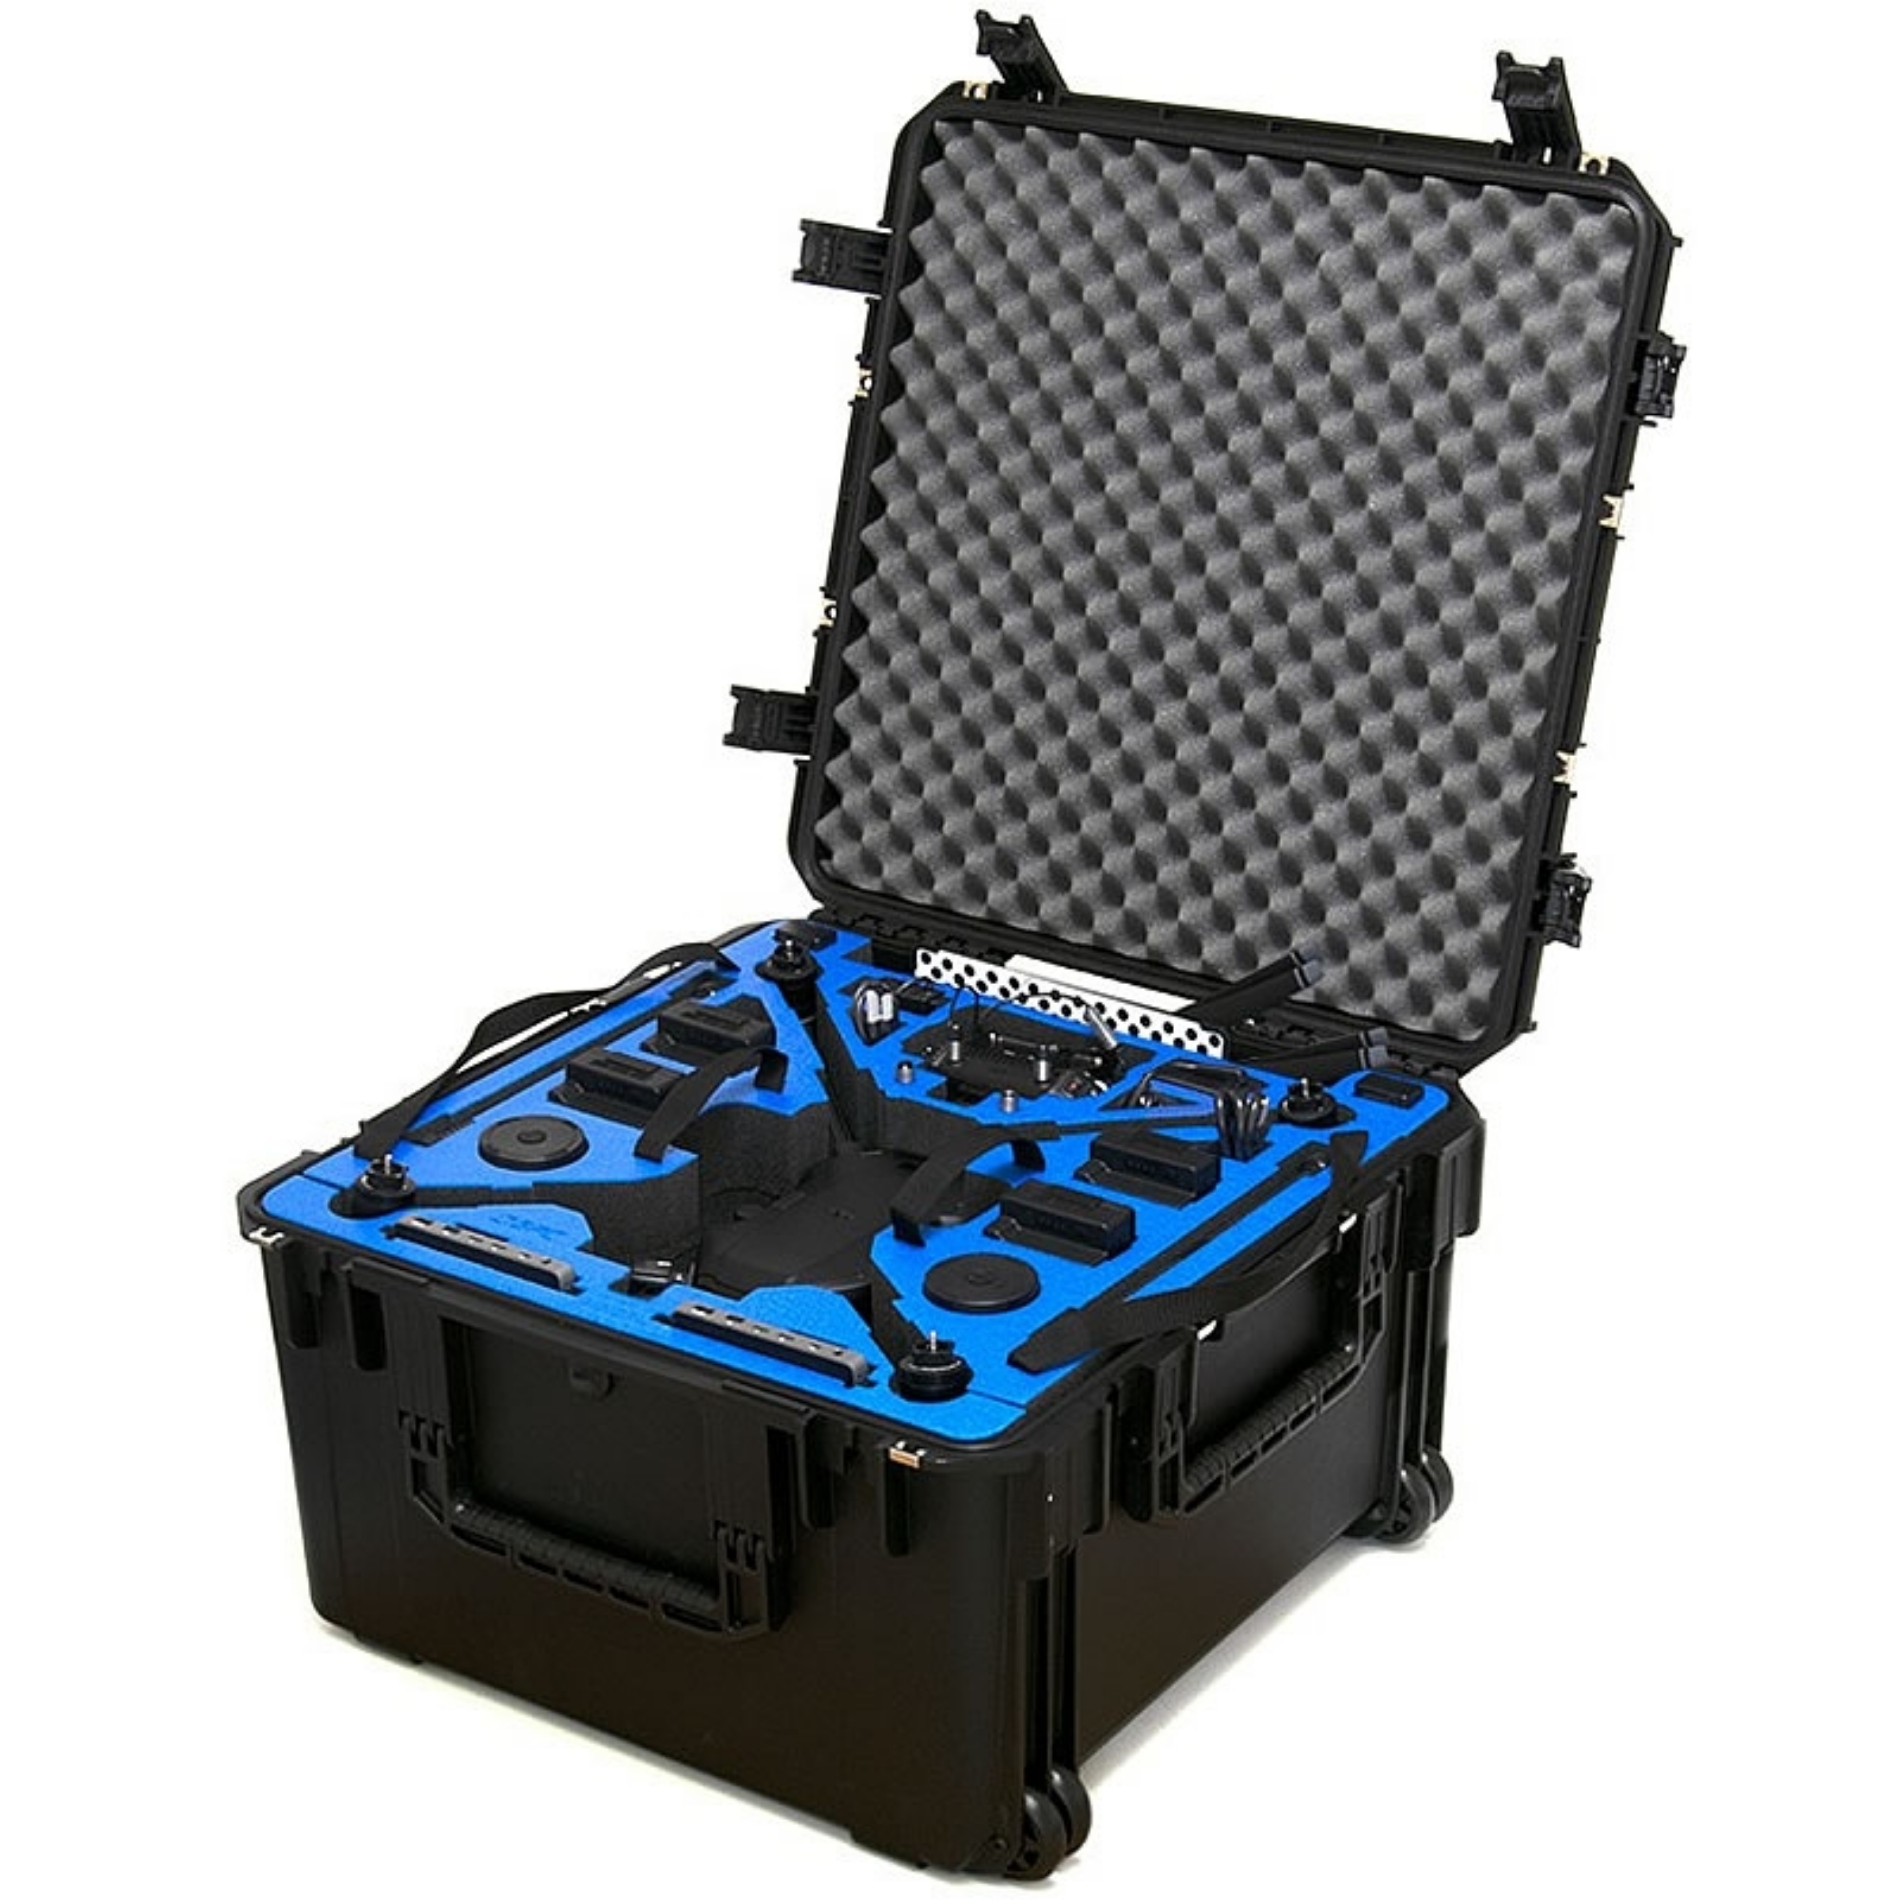 Picture of GPC DJI Matrice 200 Case